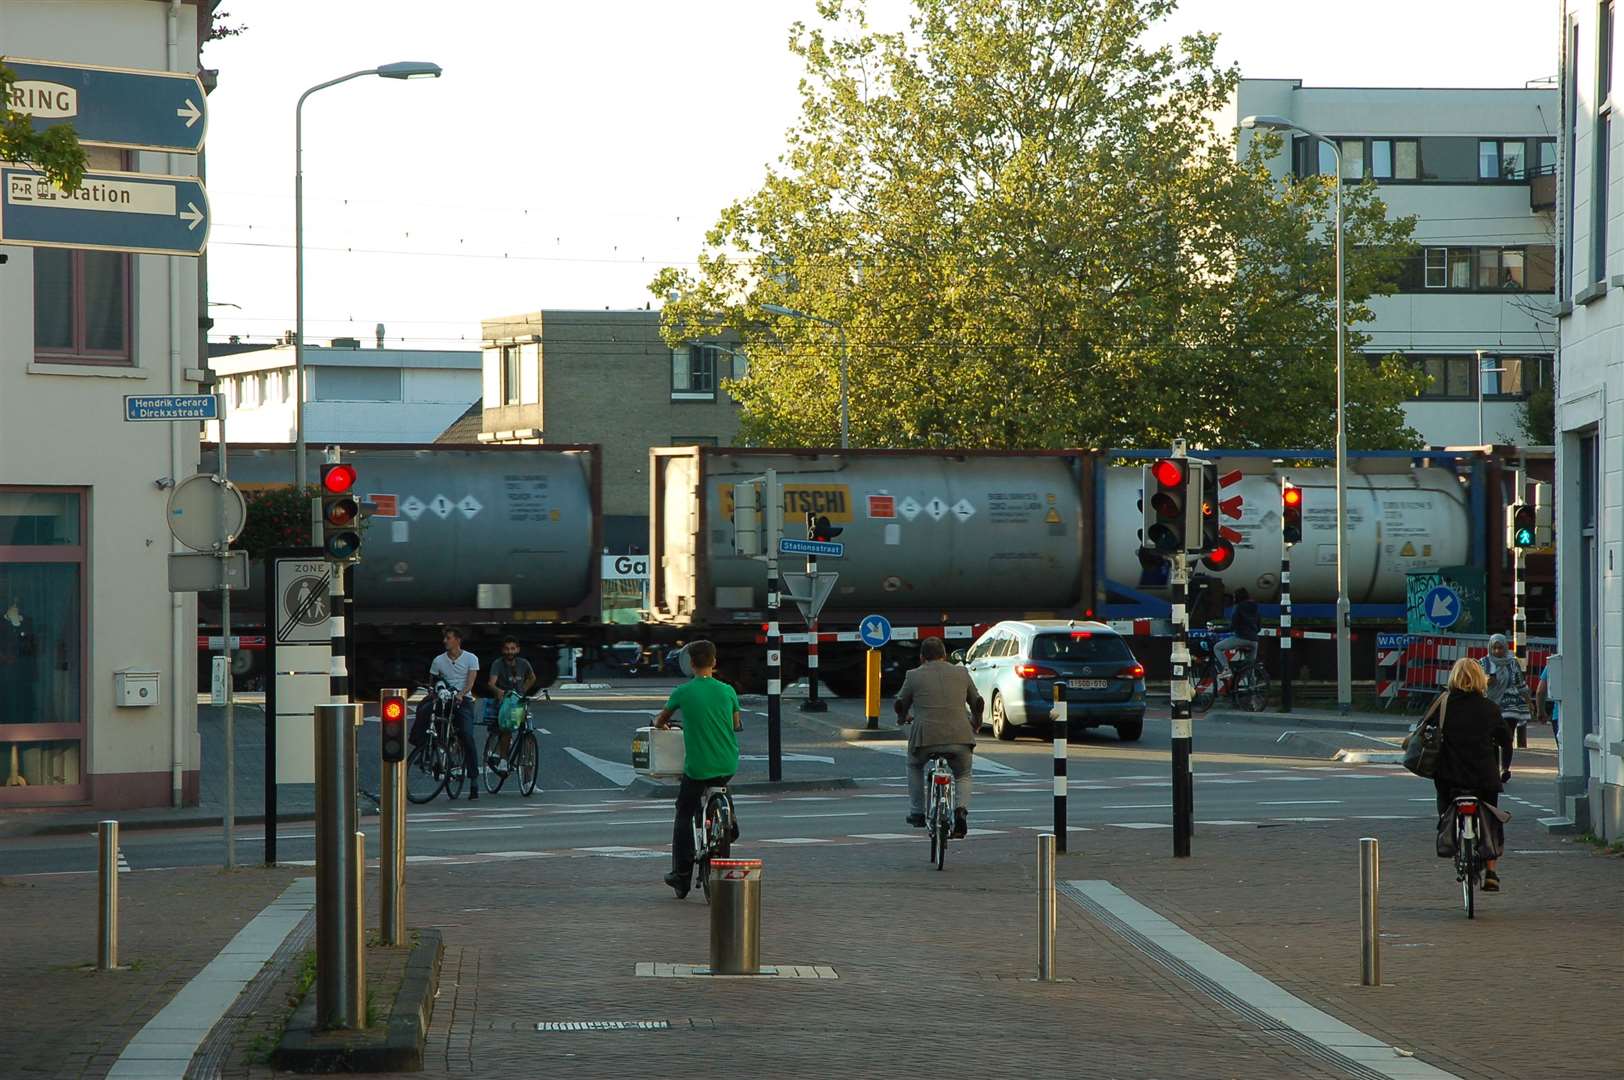 Yet another train disrupts traffic as it trundles through the middle of the town.